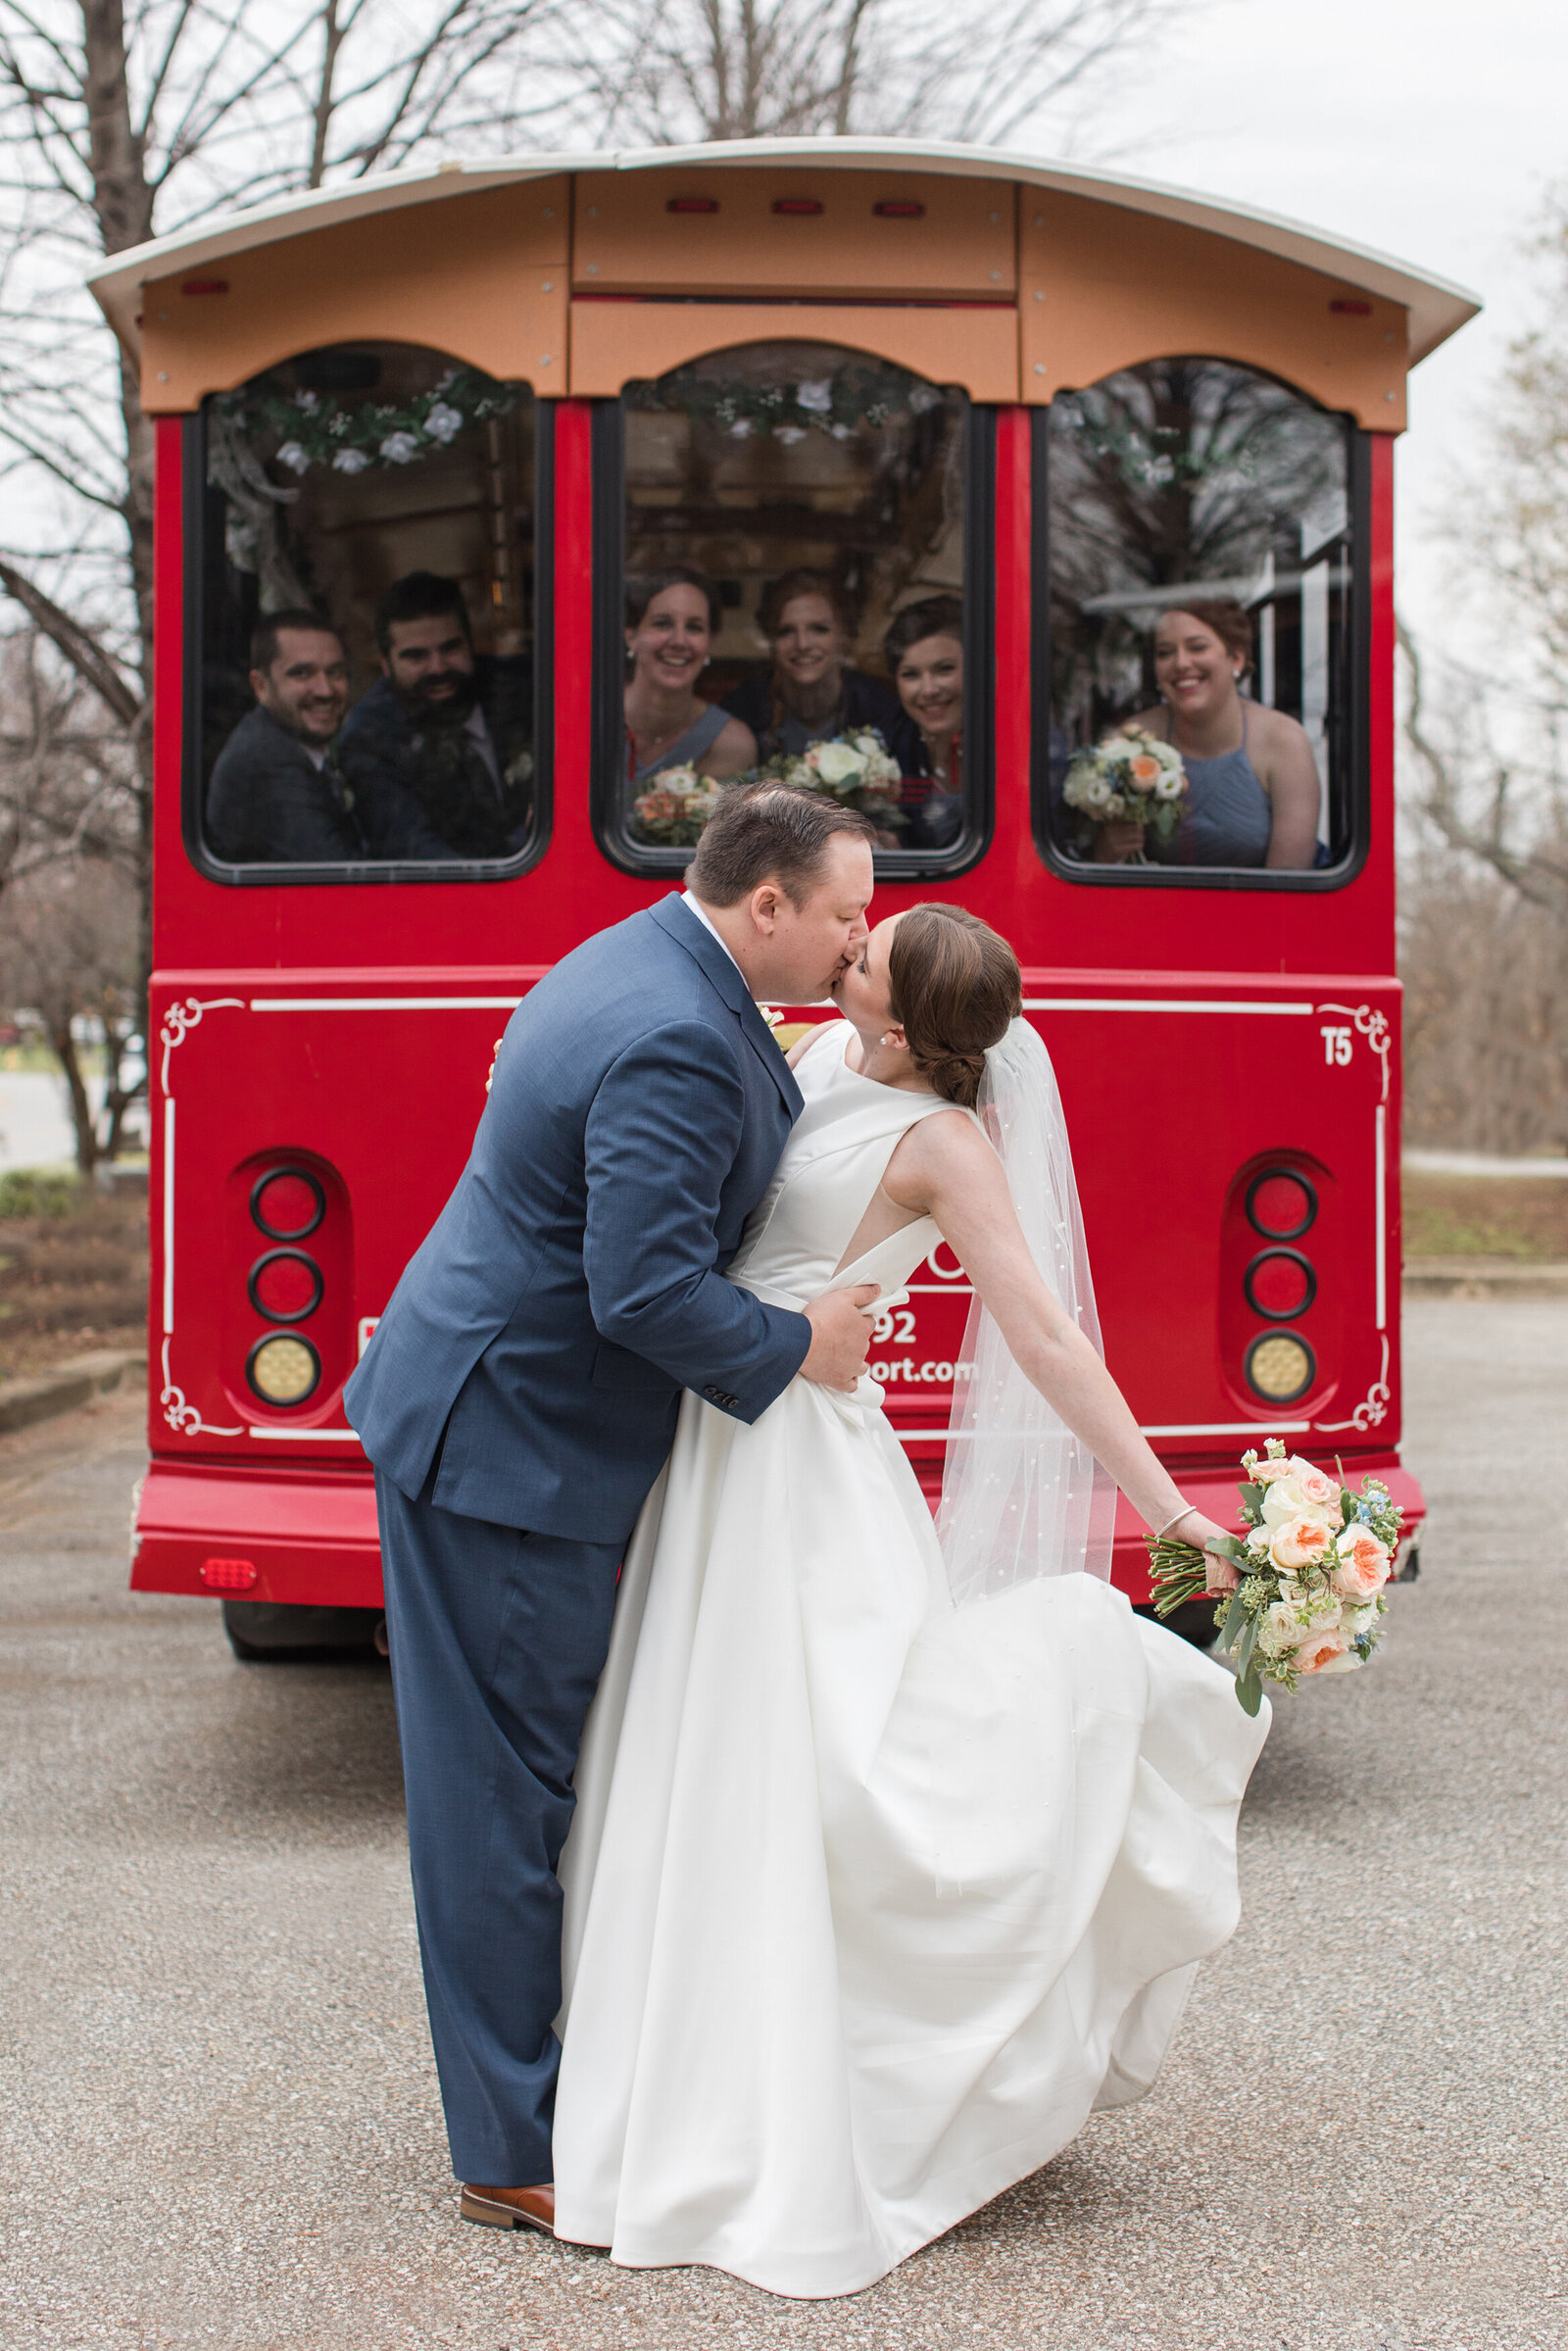 Annapolis Maryland wedding photo with historic trolley by Christa Rae Photography